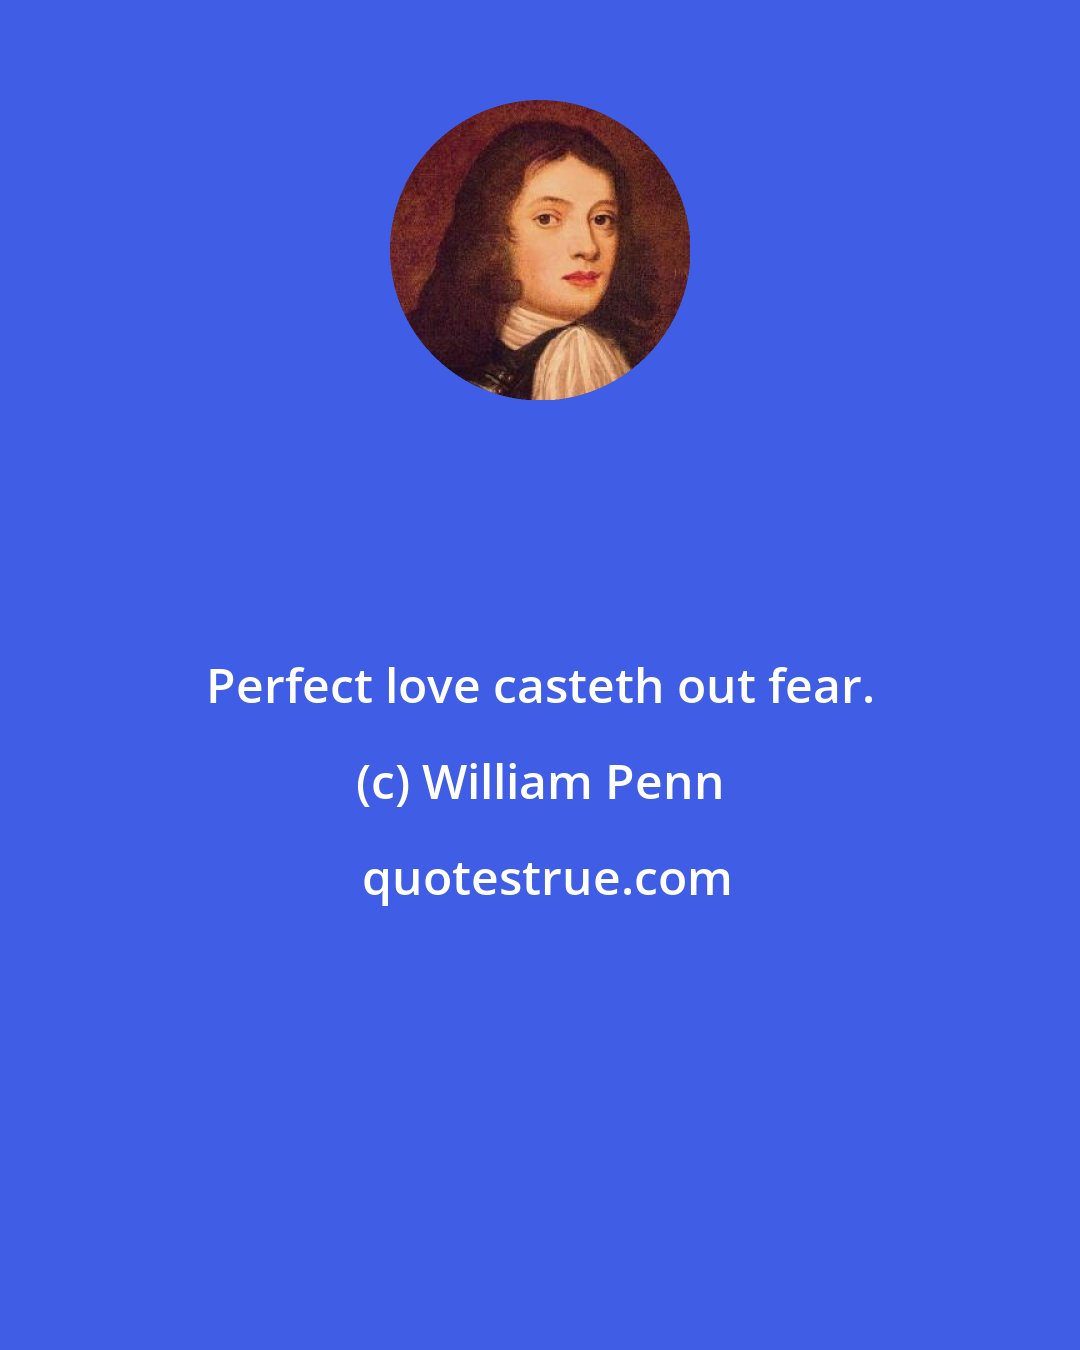 William Penn: Perfect love casteth out fear.